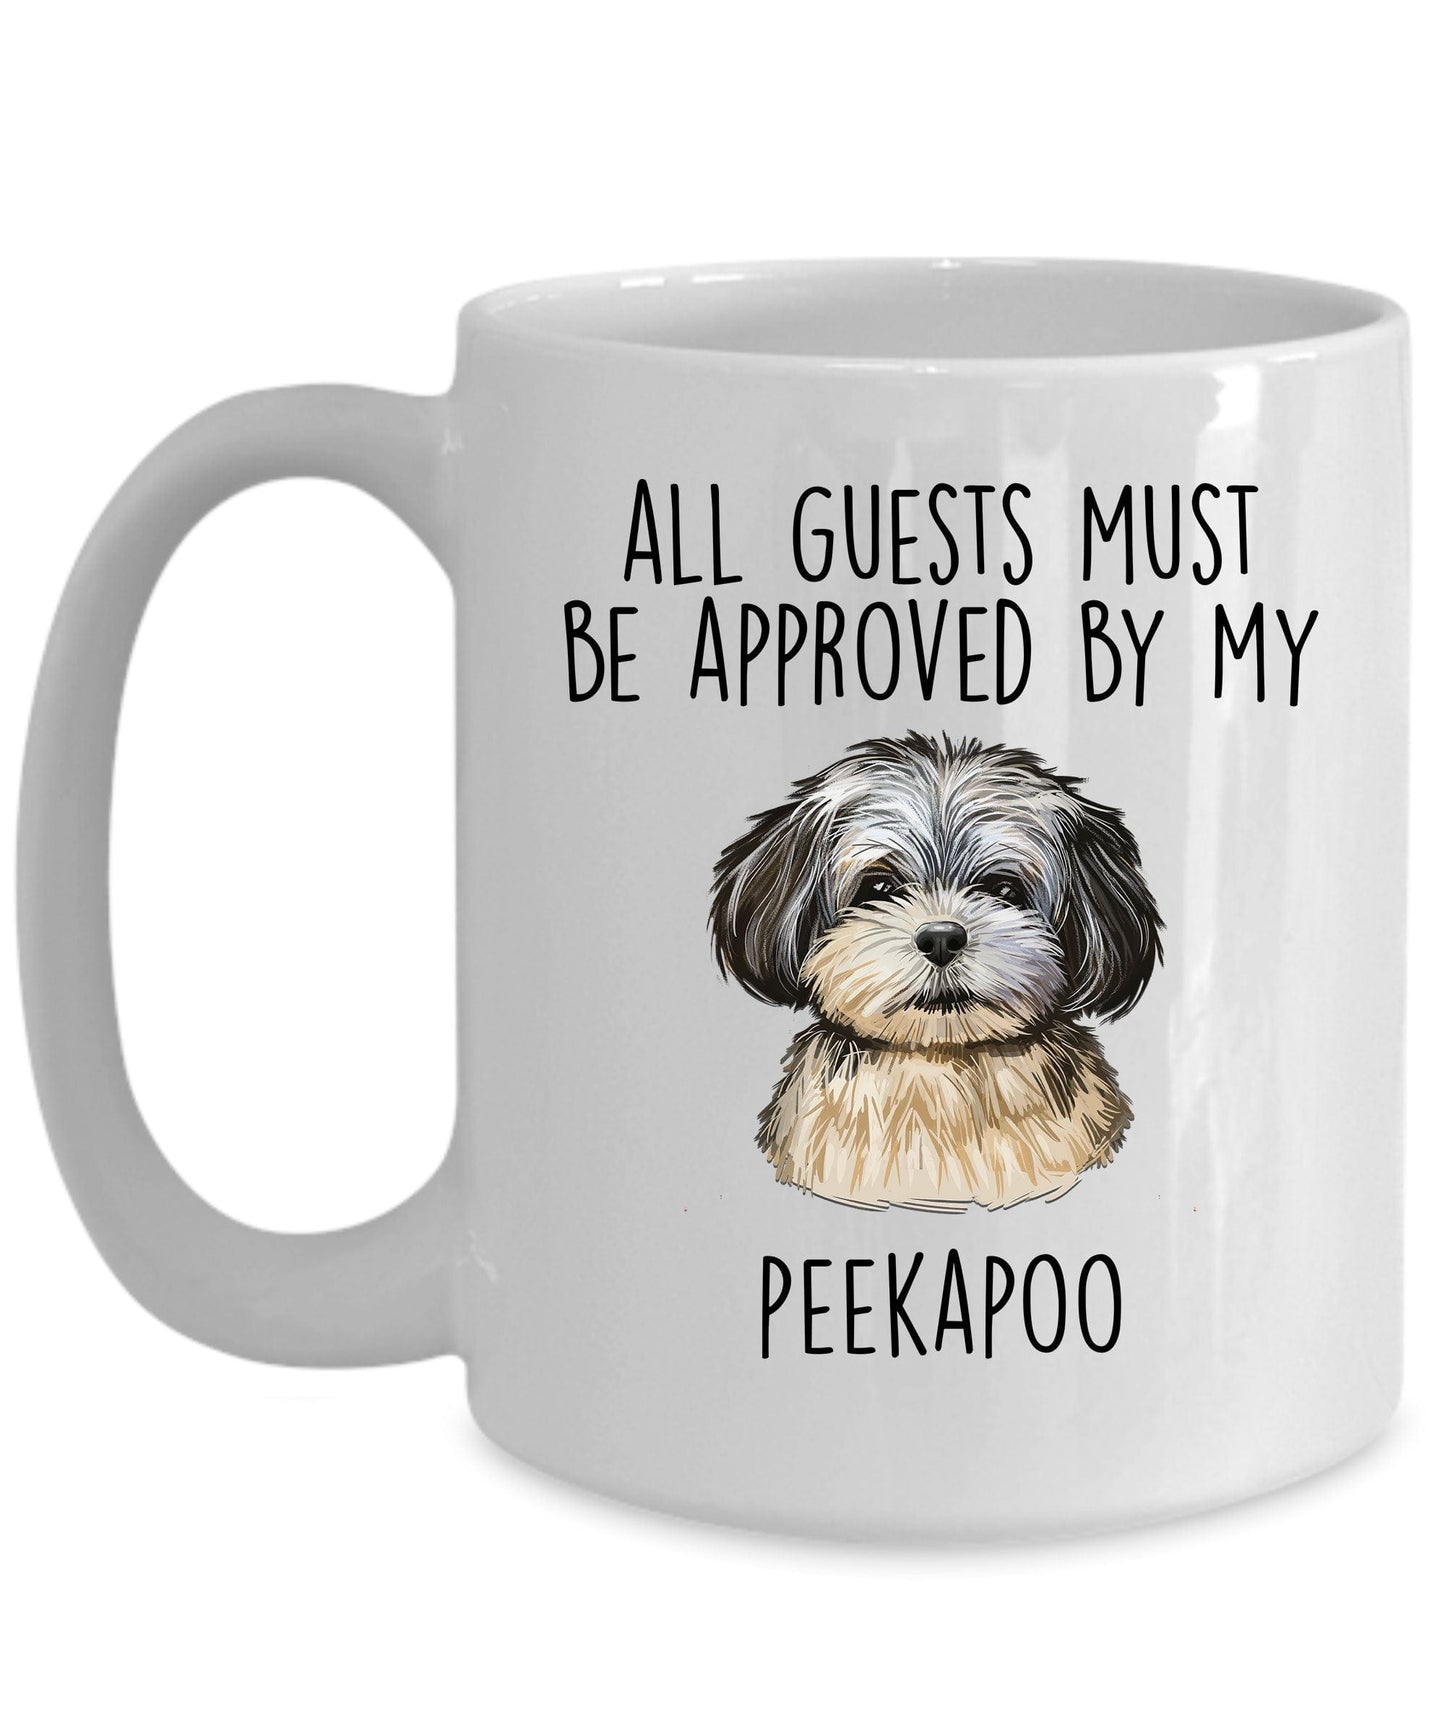 Peekapoo Puppy Funny Coffee Mug - All guests must be approved by my Peekapoo